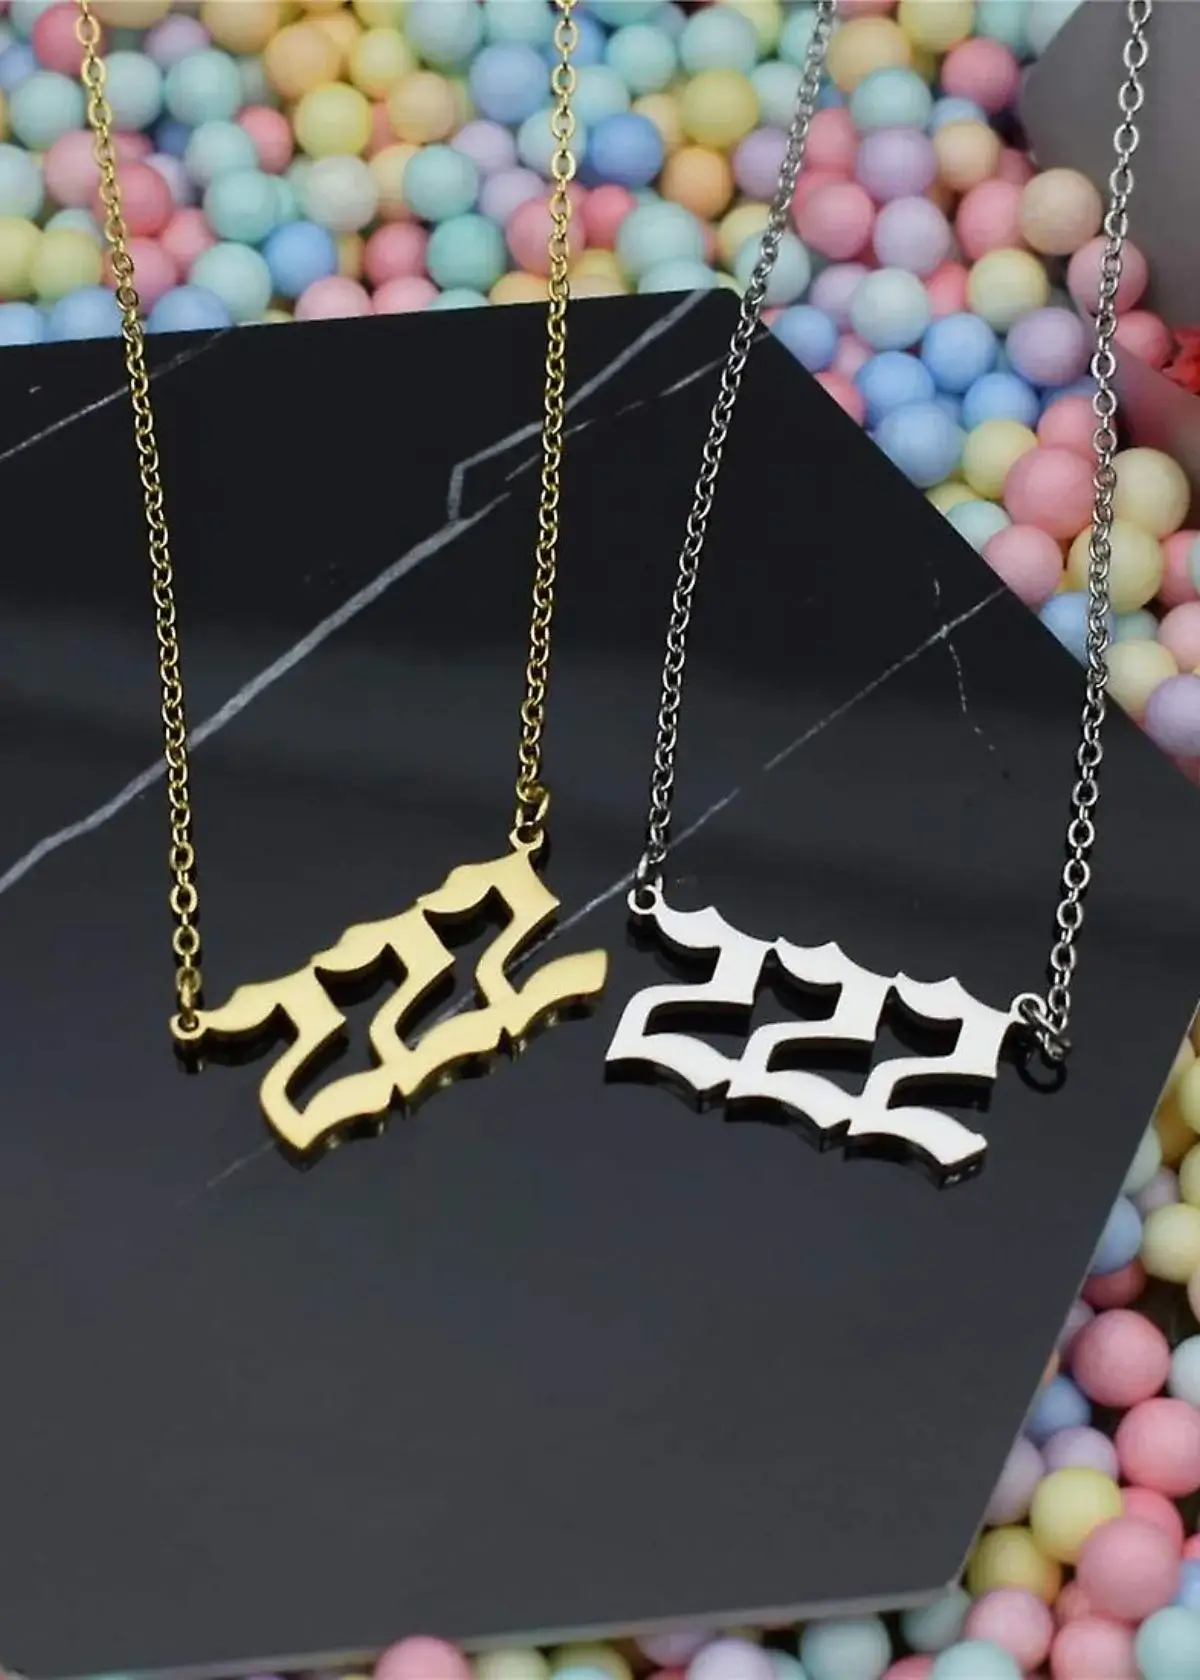 222 necklace